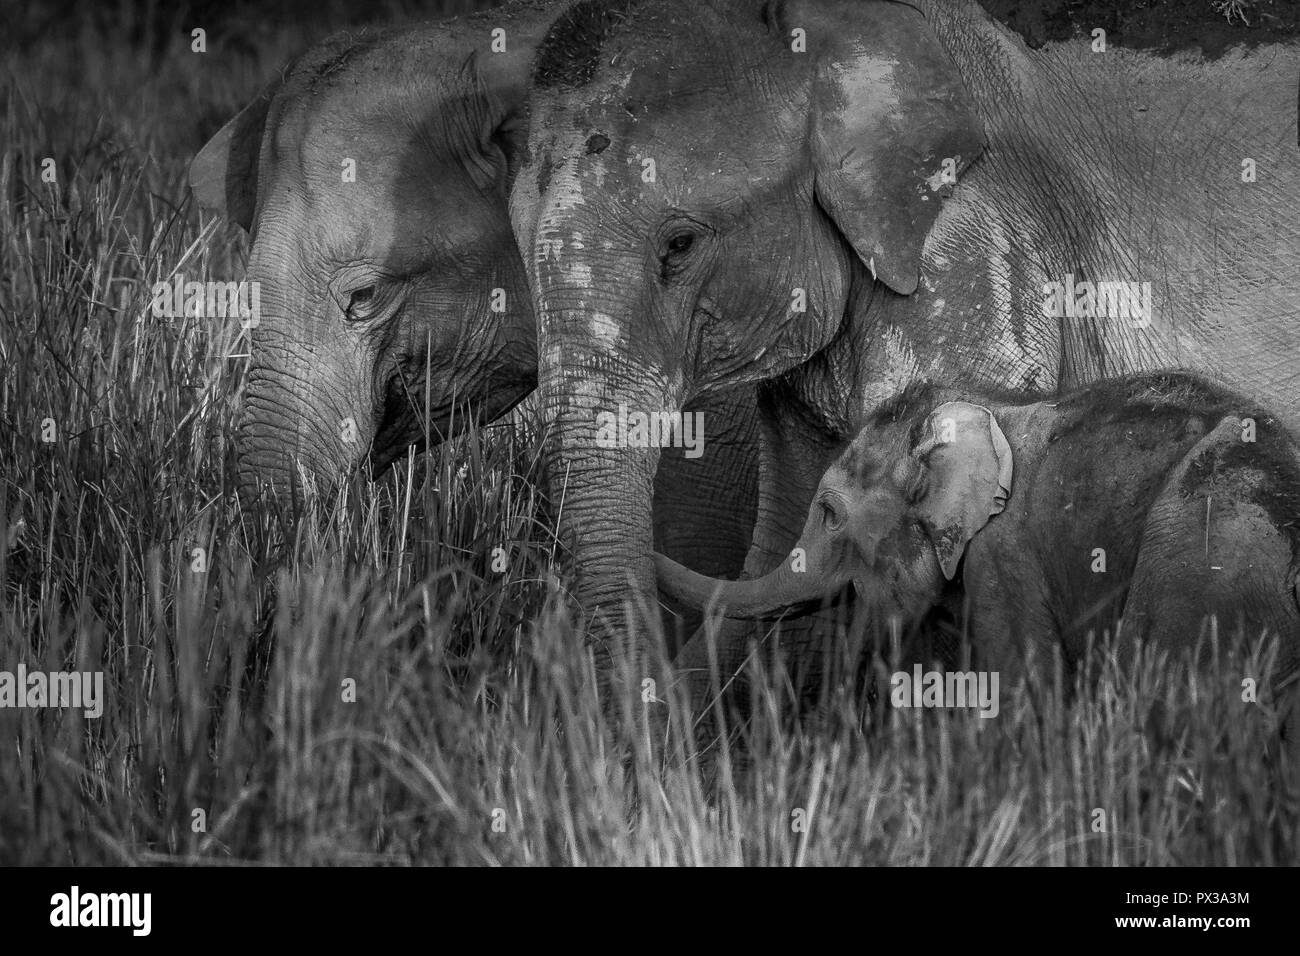 This image of Mother and baby Elephant is taken at Kaziranga National Park in India. Stock Photo